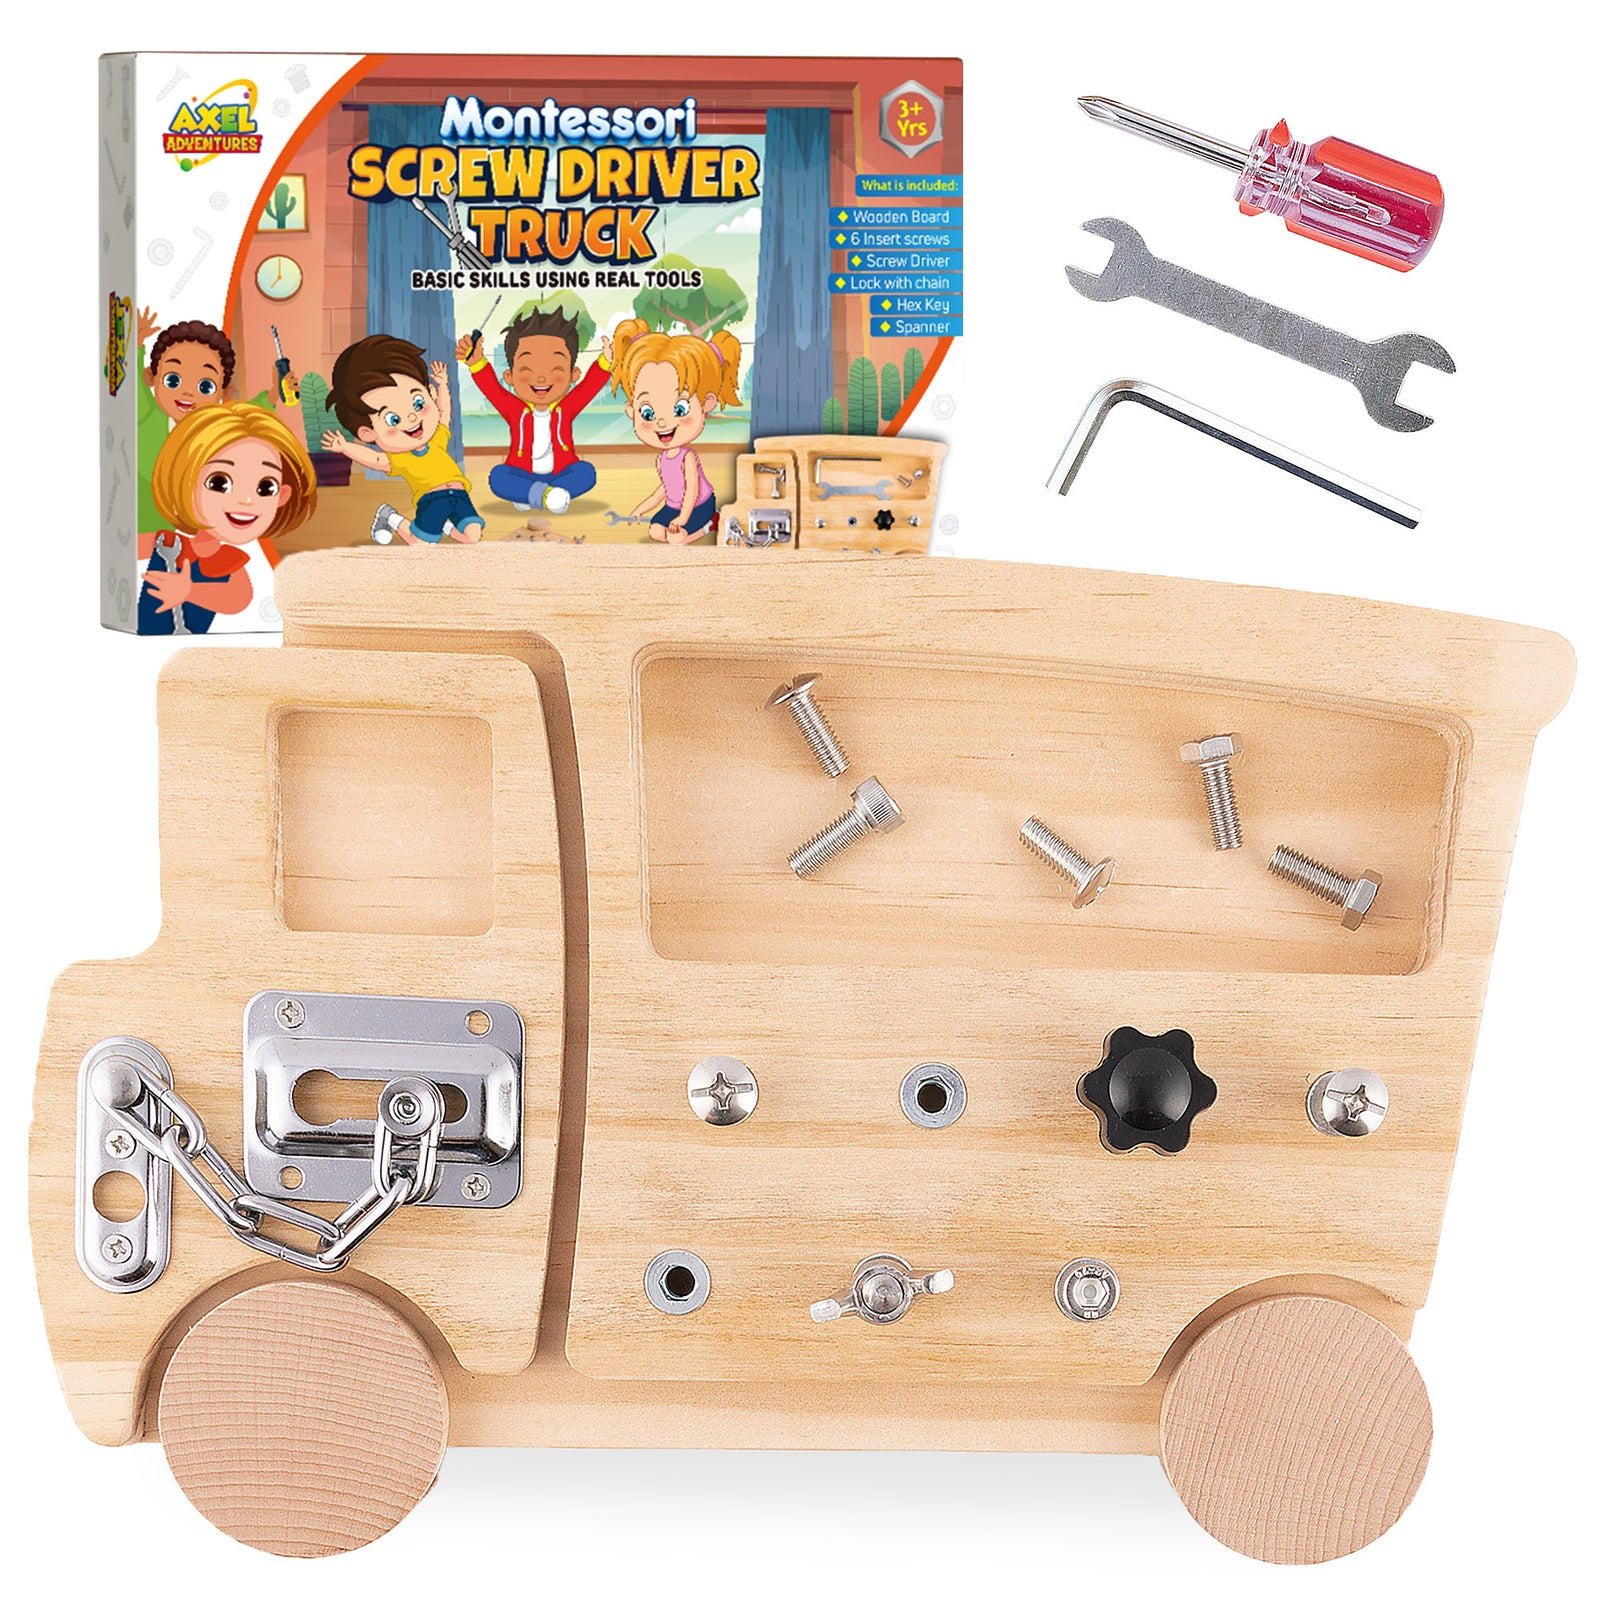 Montessori Screwdriver Truck Real Tools Toy for Kids - Axel Adventures